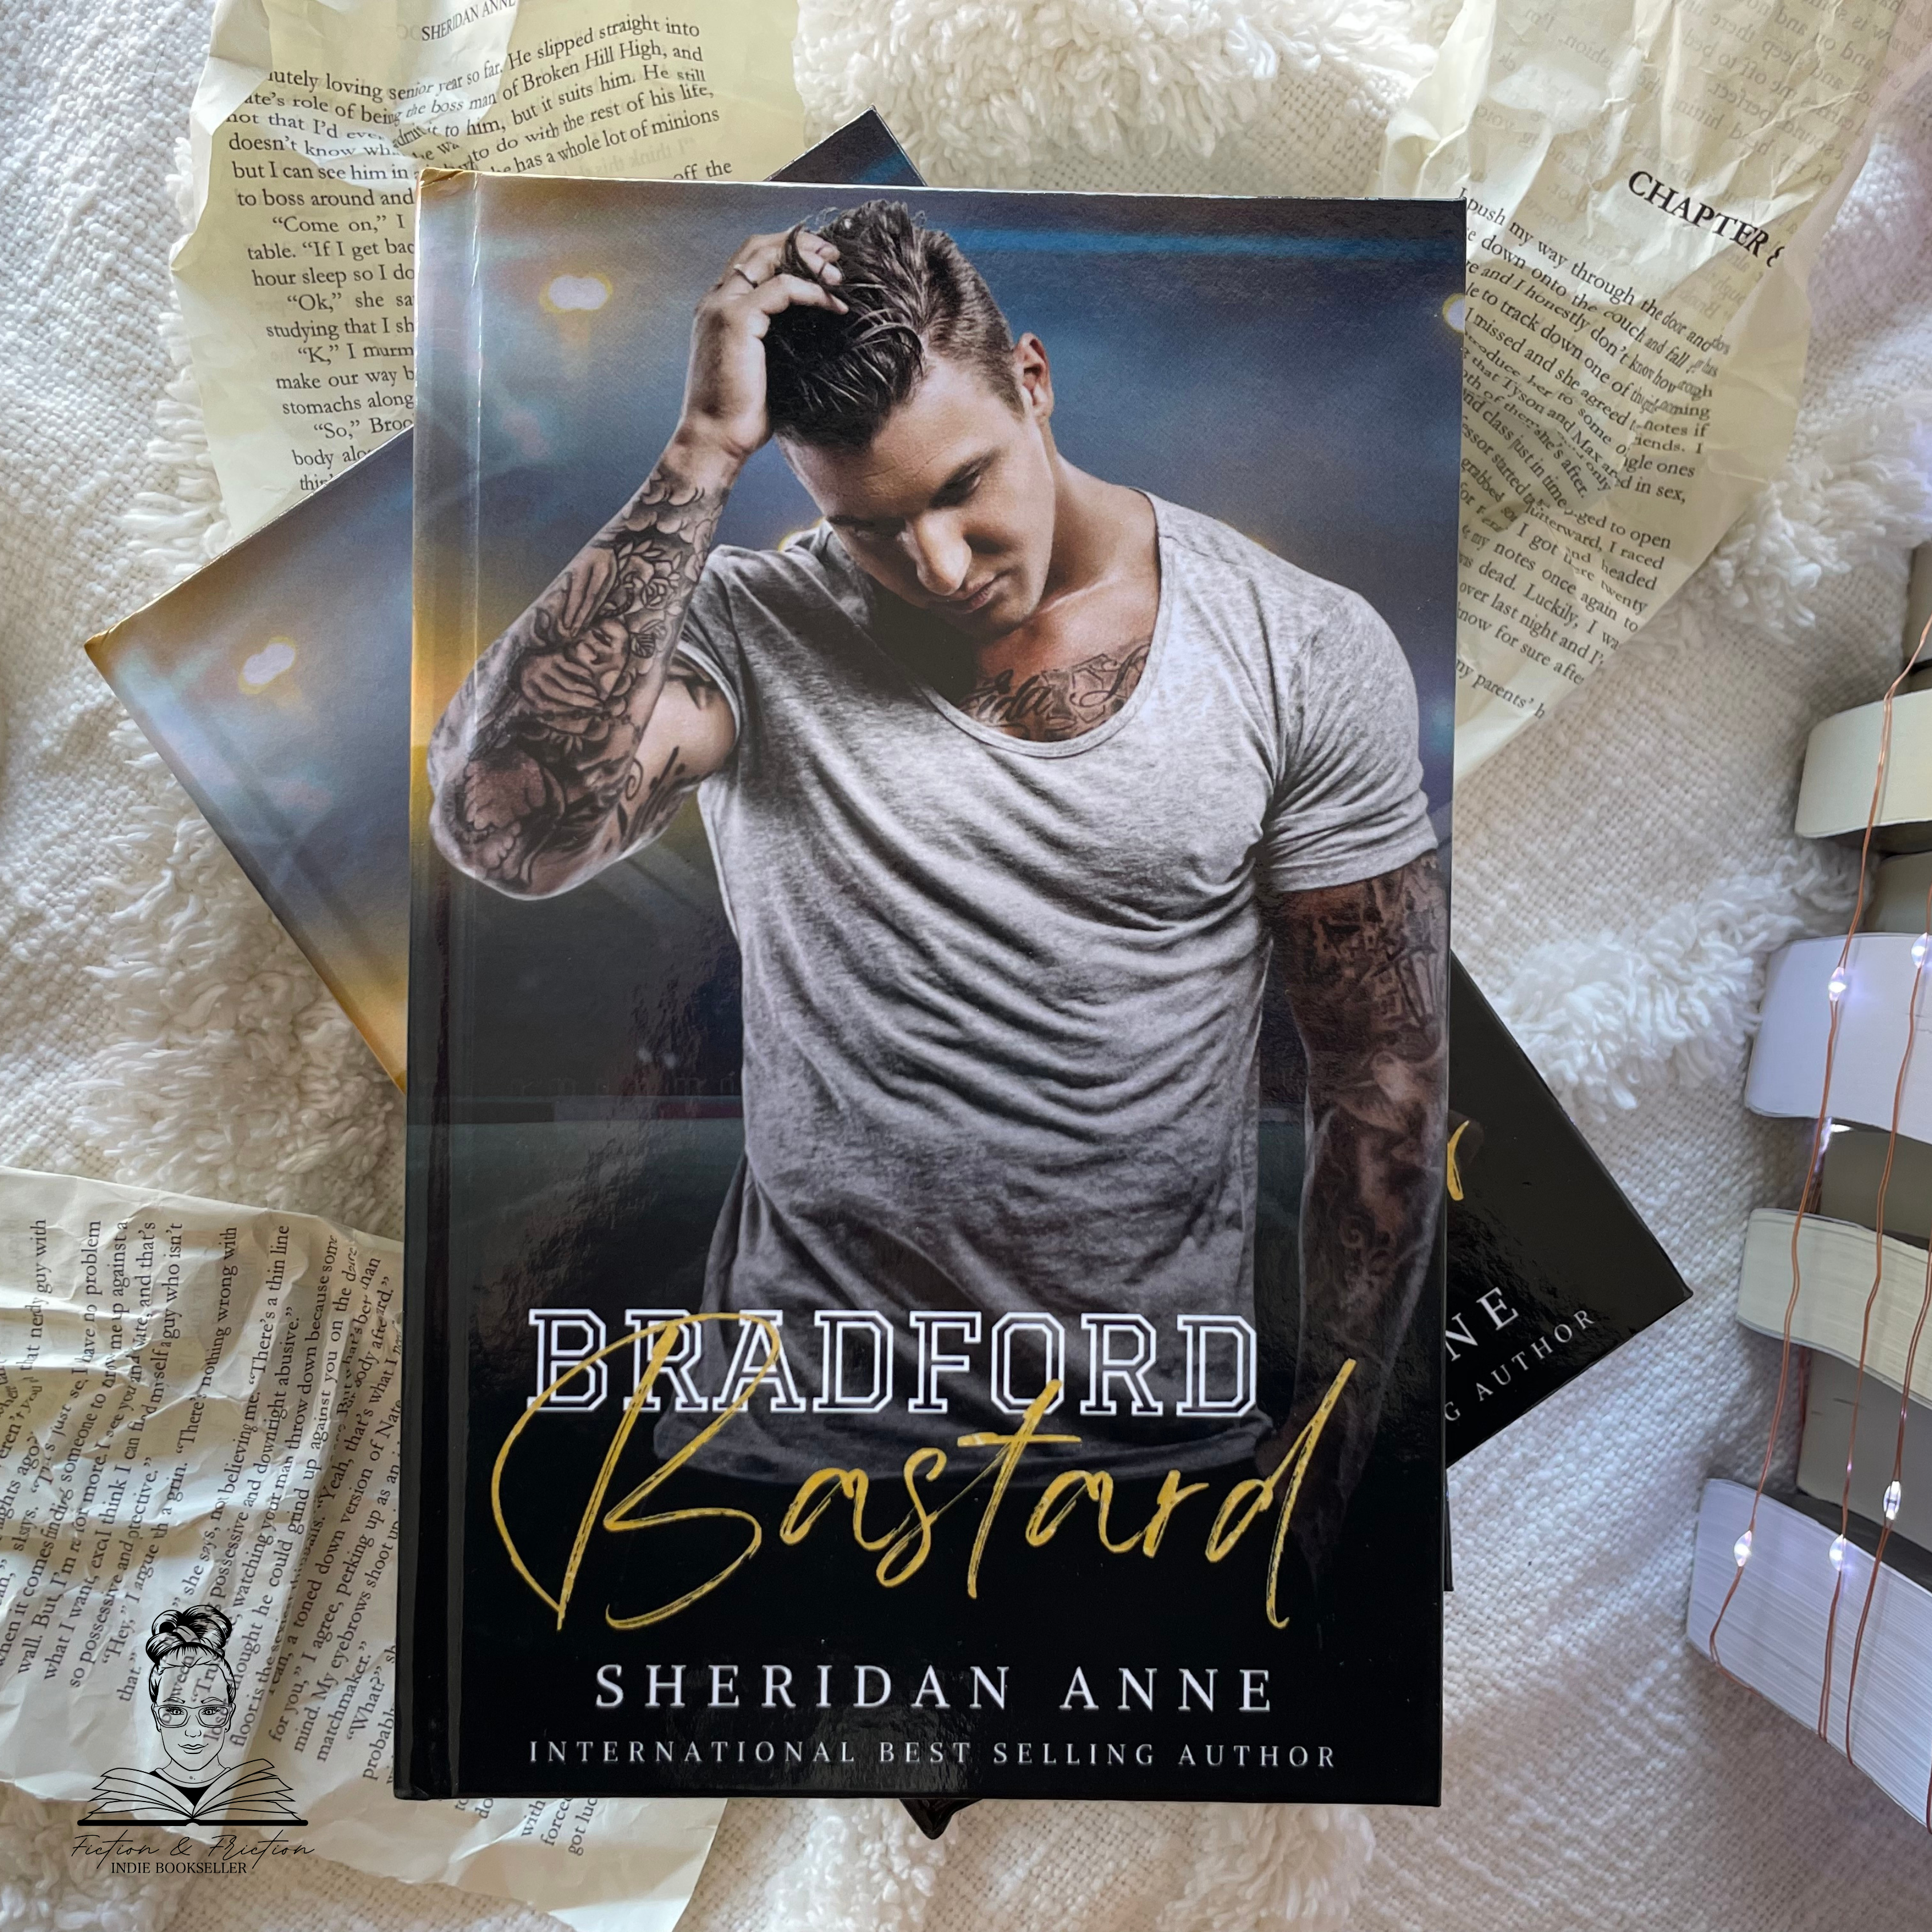 Bardford Bastards: HARDCOVERS by Sheridan Anne